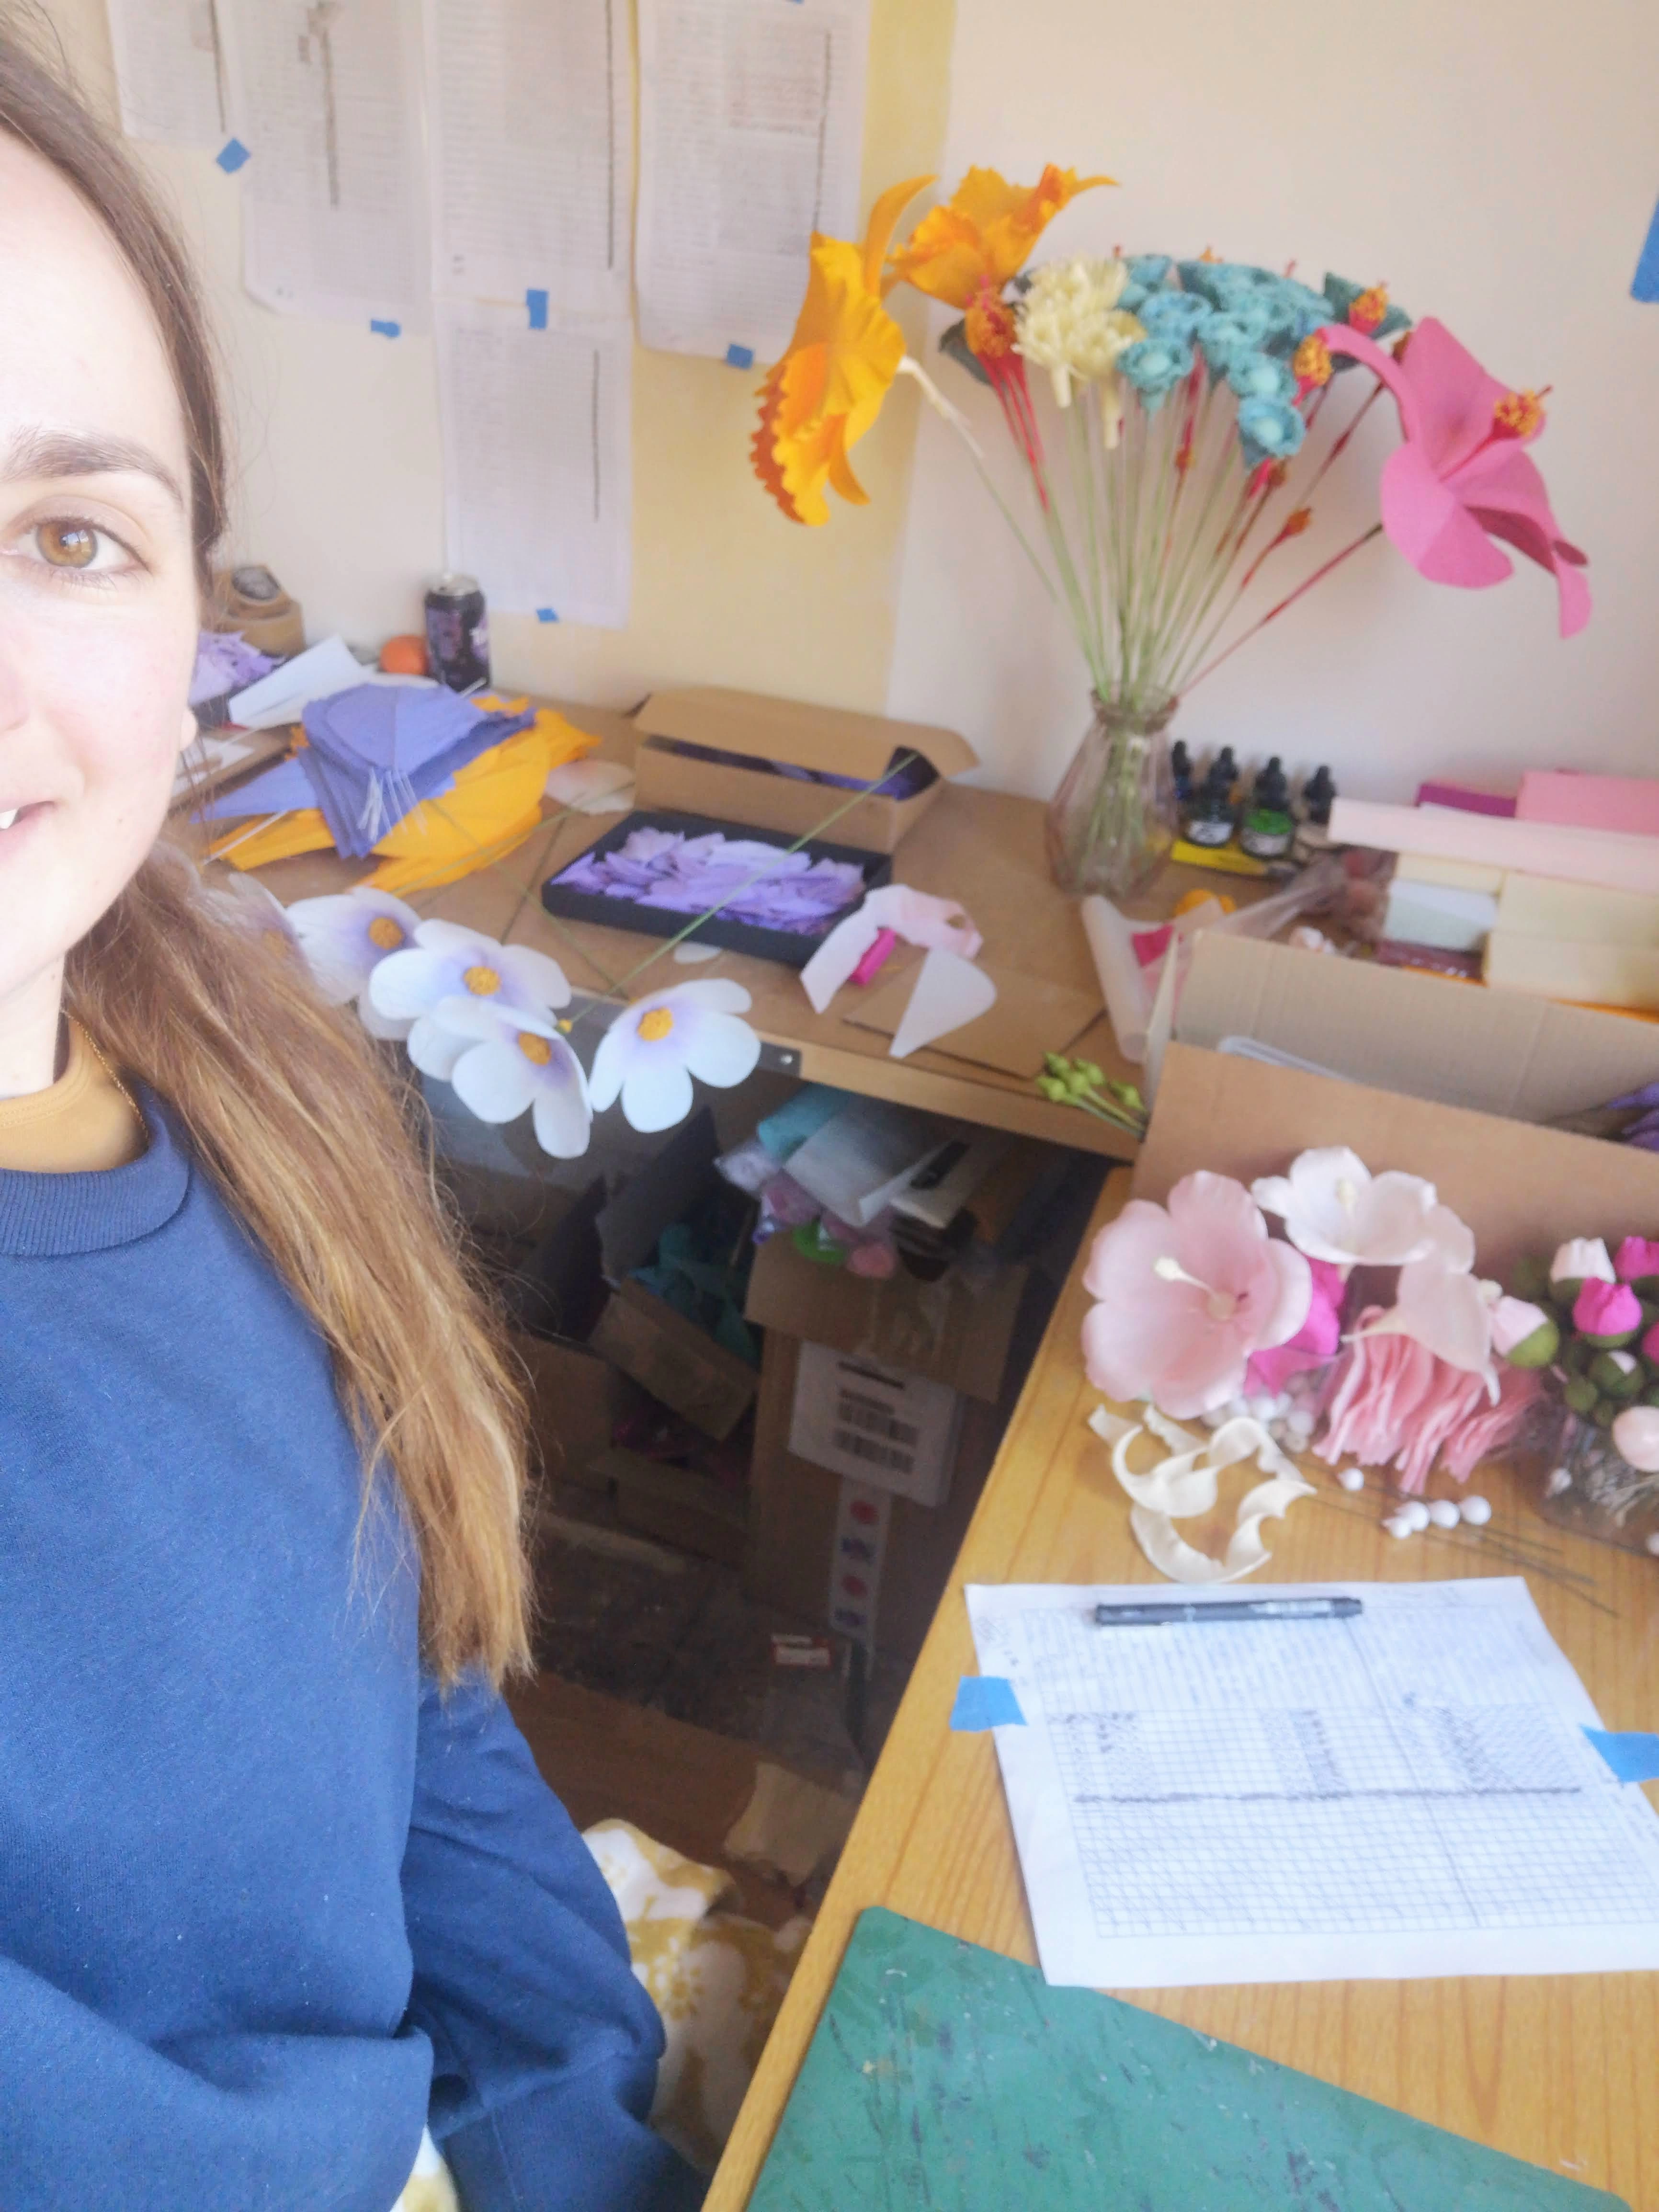 Artist photographed sitting at a desk, surrounded by paper flowers and to do lists